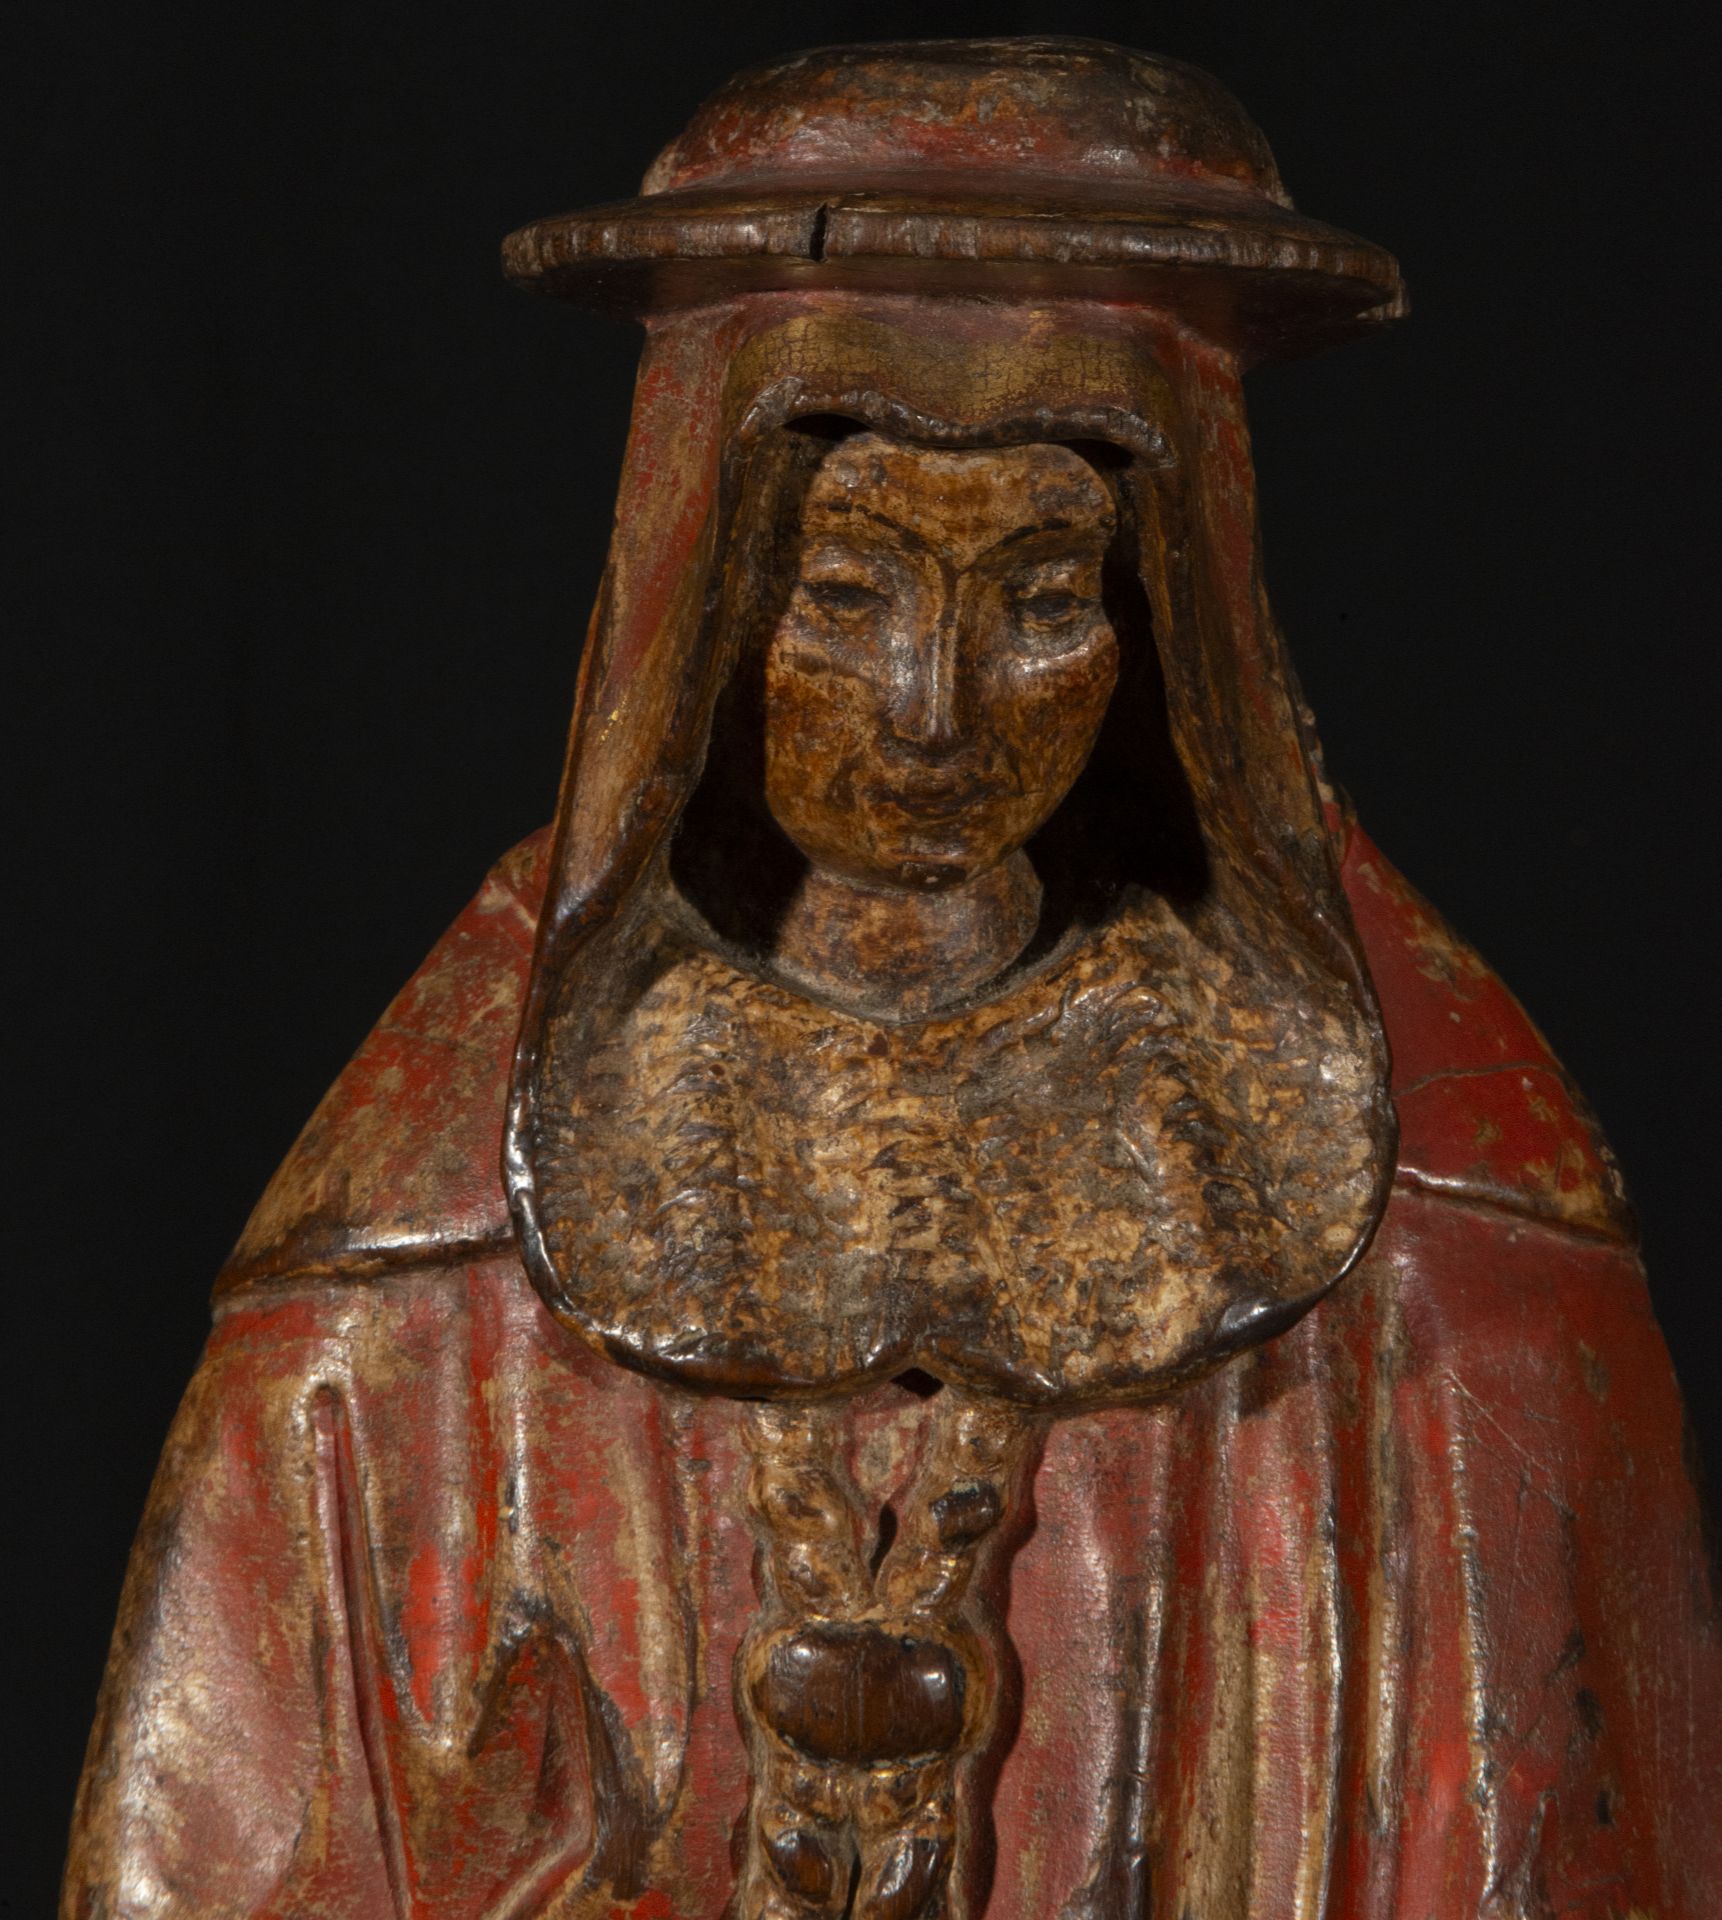 Spectacular Gothic Carving from Mechelen of Cardenal from the 15th century, with original polychrome - Image 2 of 7